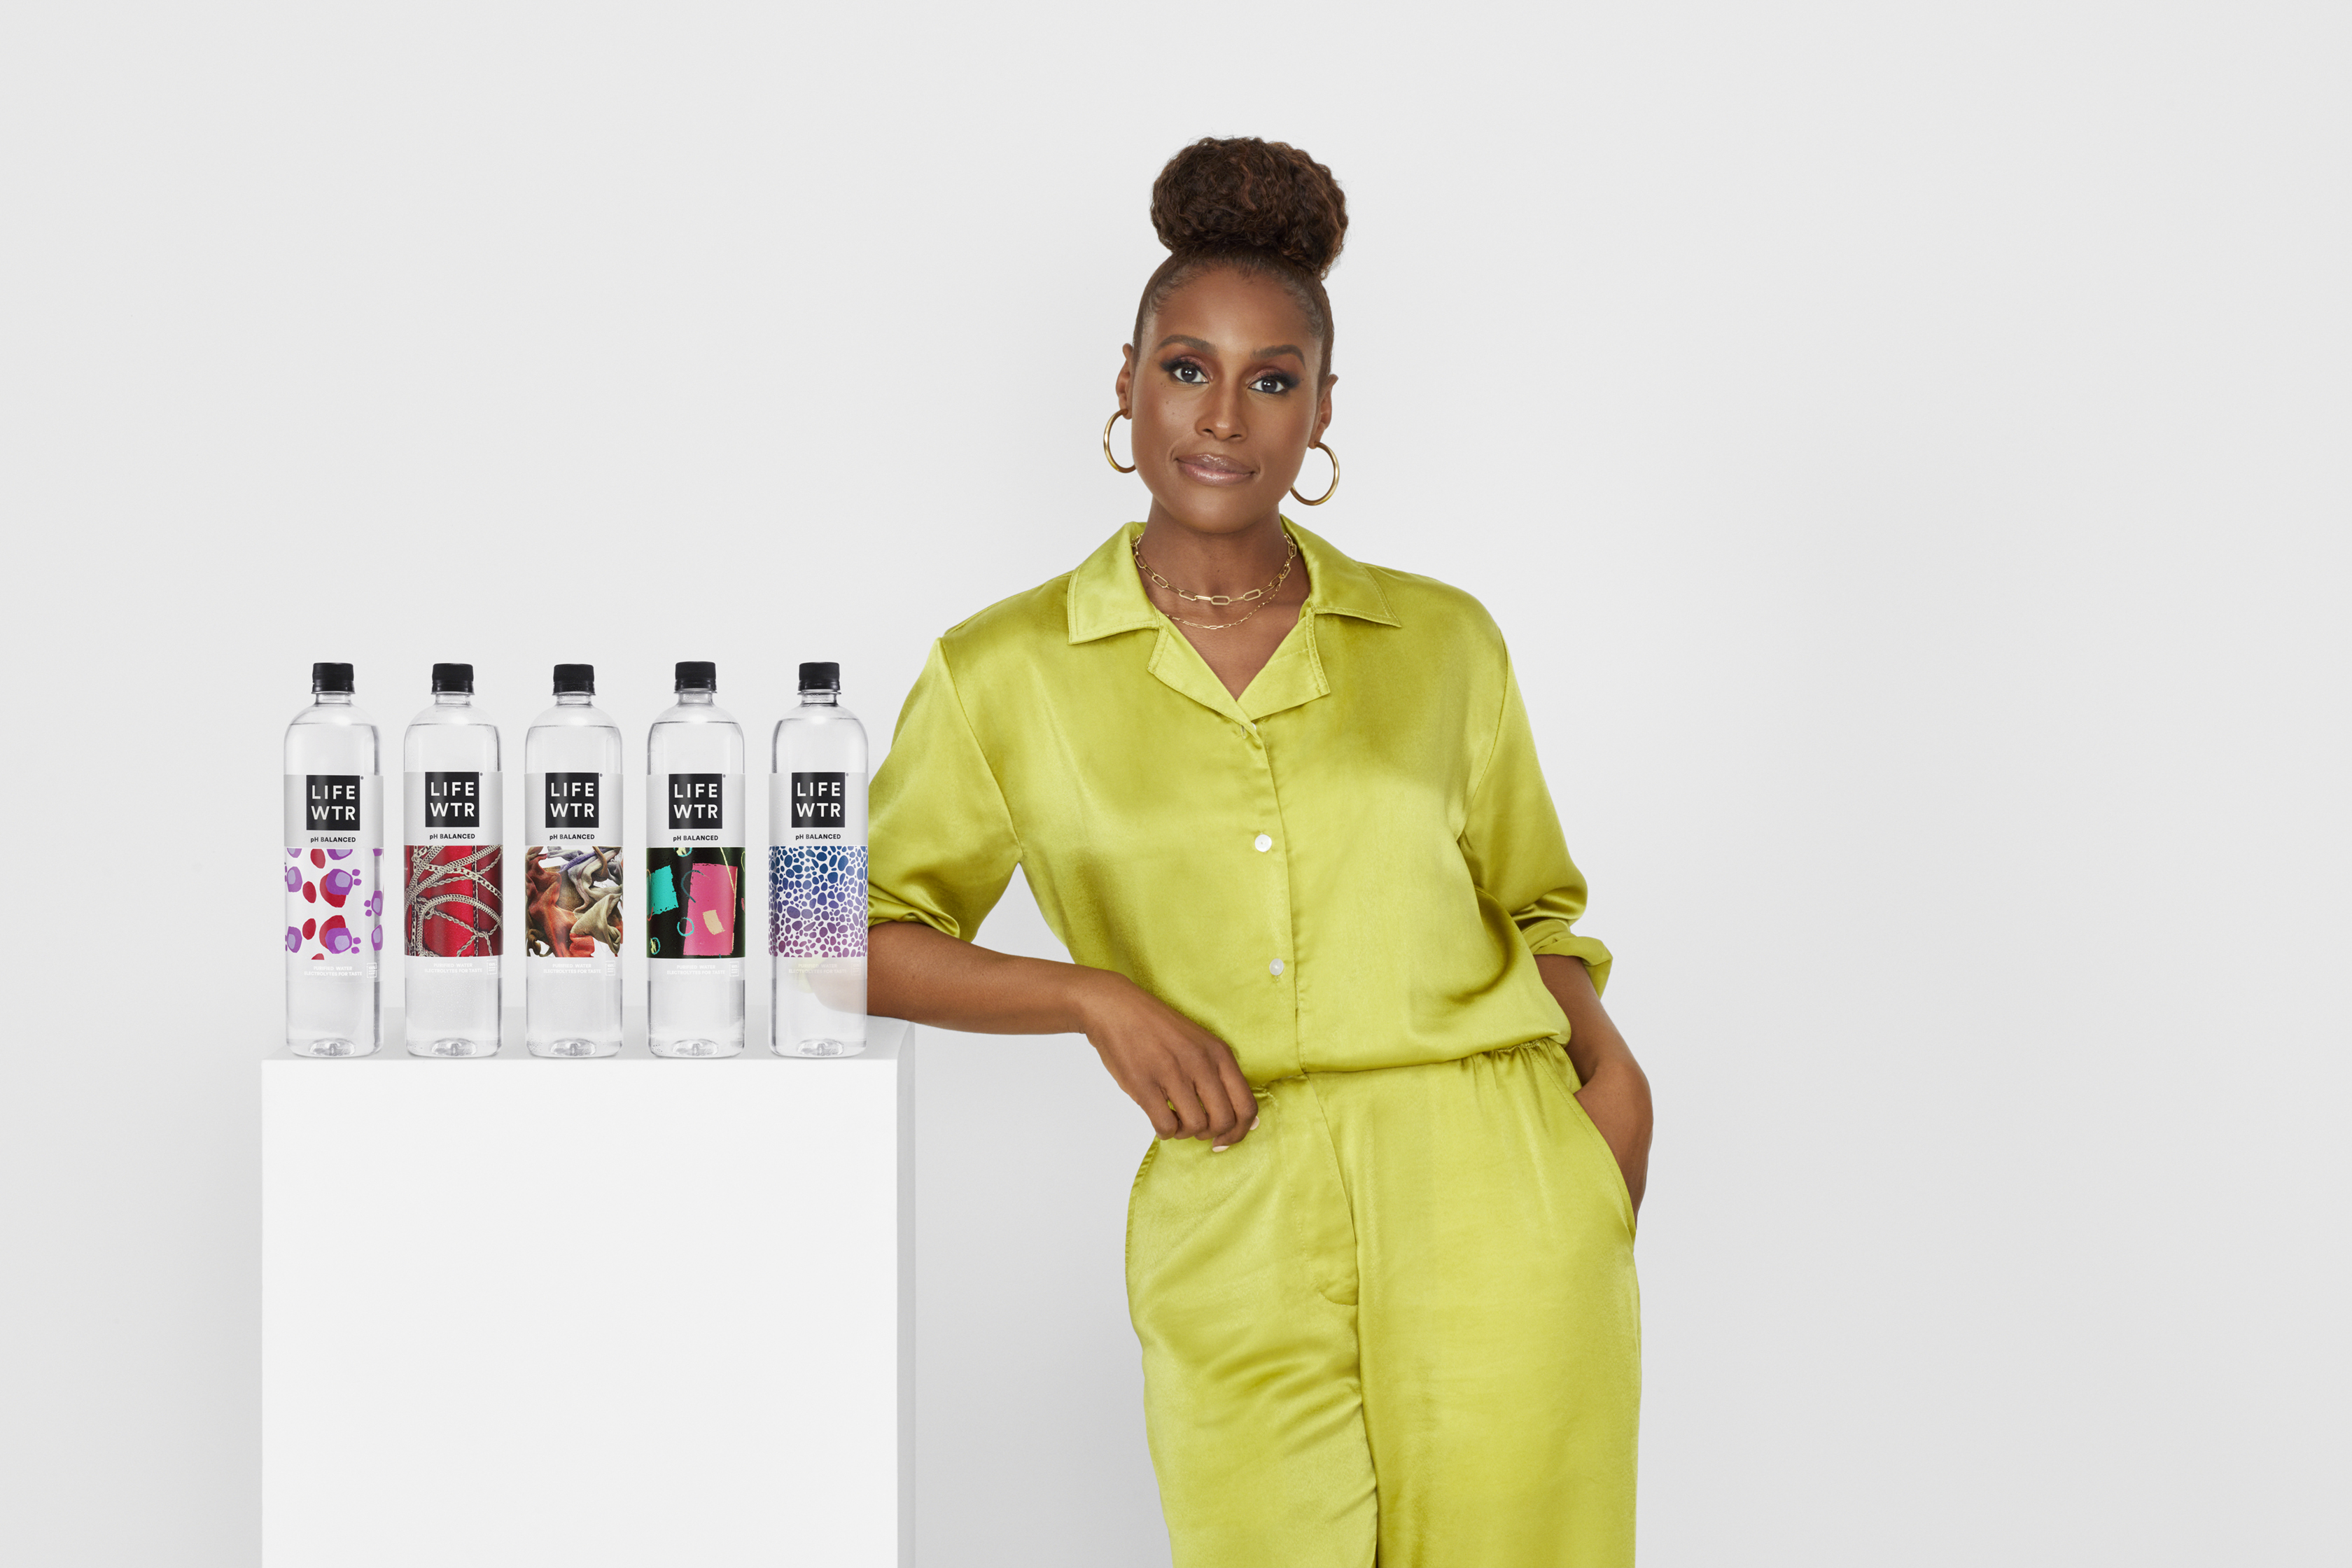 Issa Rae Partners With LIFEWTR For "Life Unseen" Campaign To Help Creatives